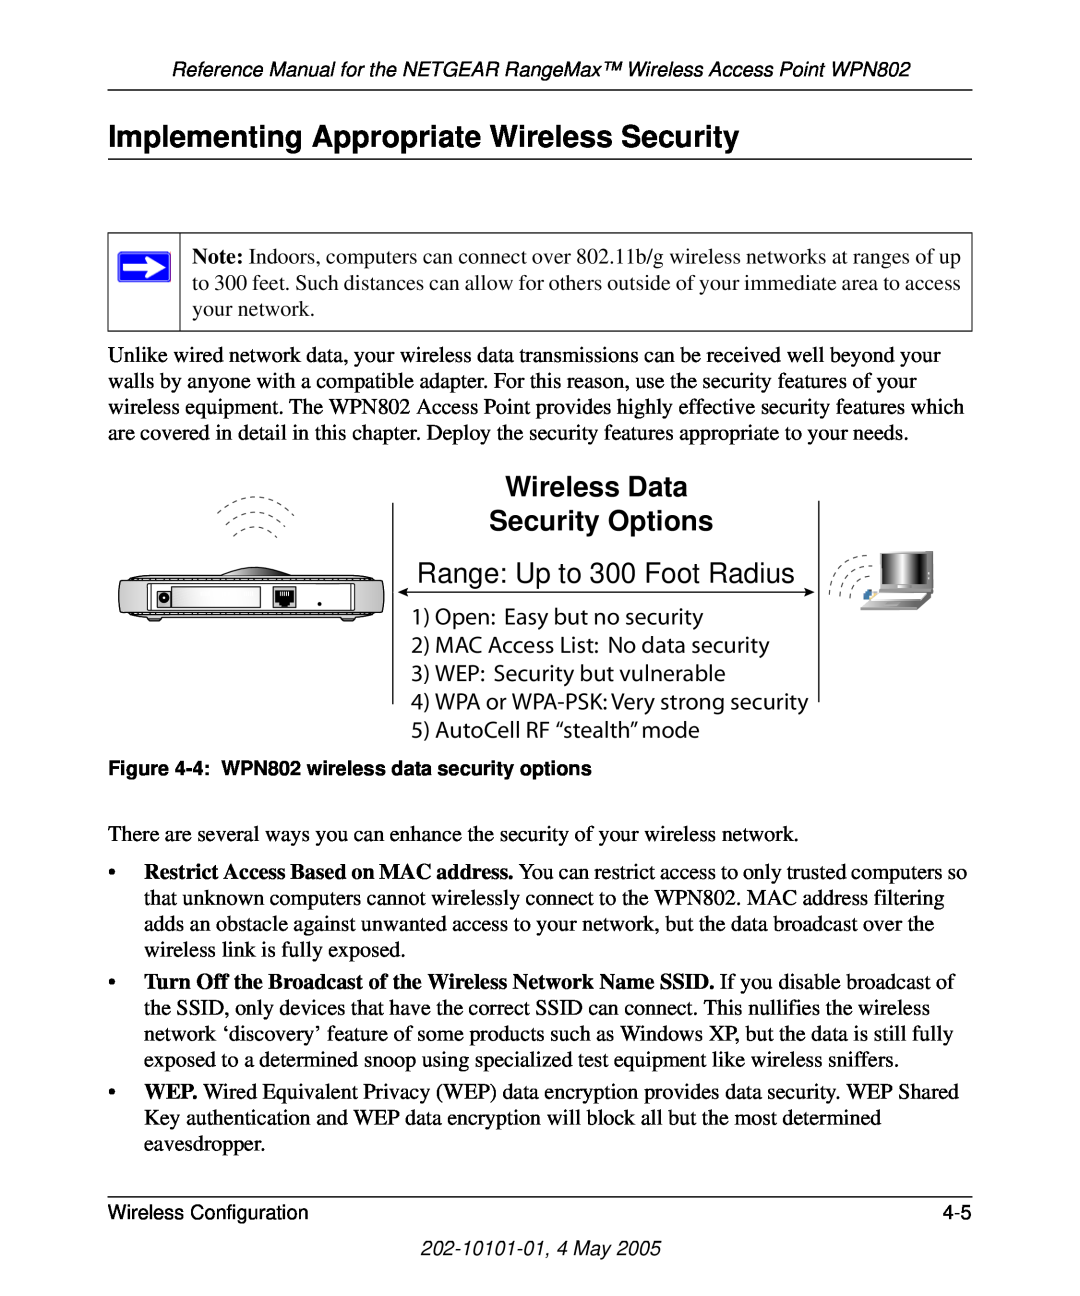 NETGEAR WPN802 Implementing Appropriate Wireless Security, Wireless Data Security Options, Range Up to 300 Foot Radius 